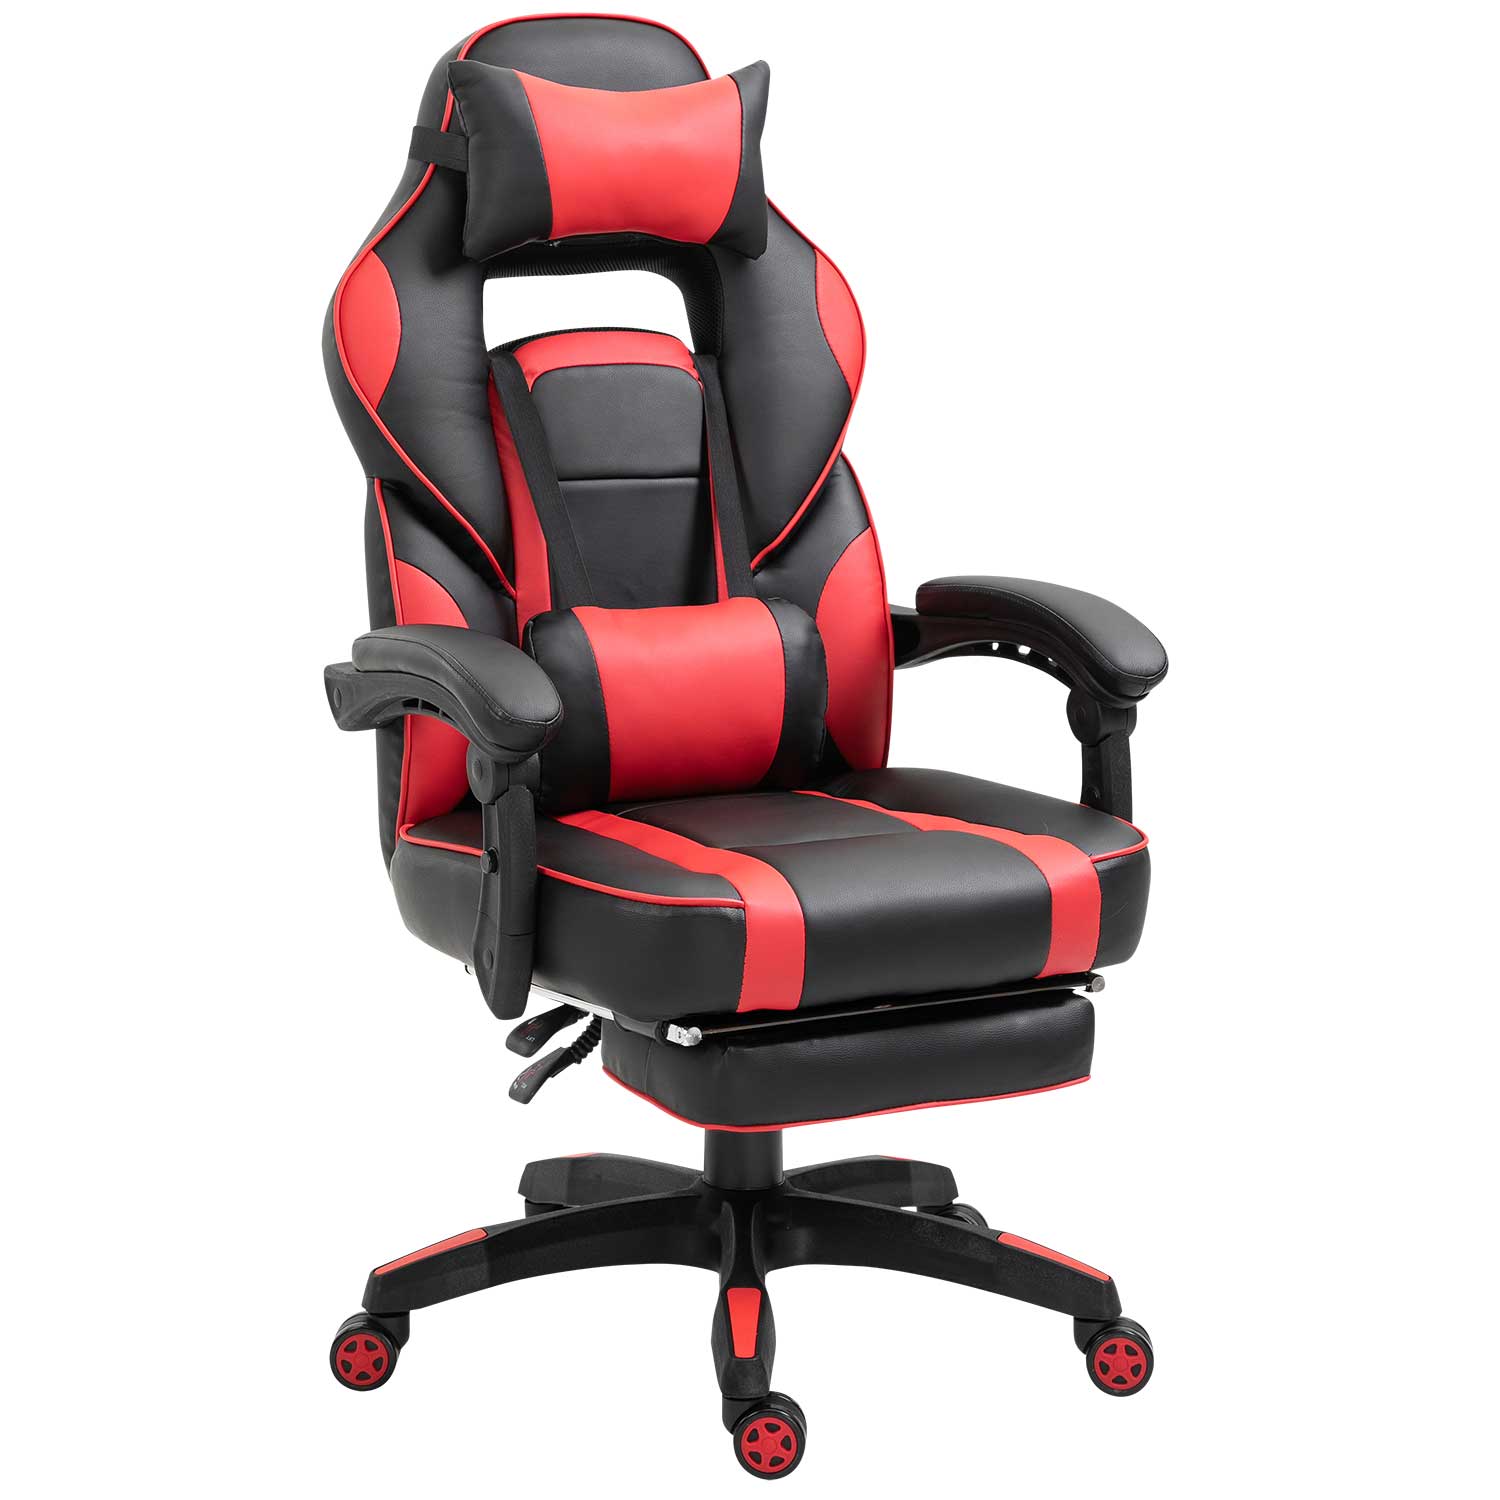 Black and Red Ergonomic Gaming Office Chair